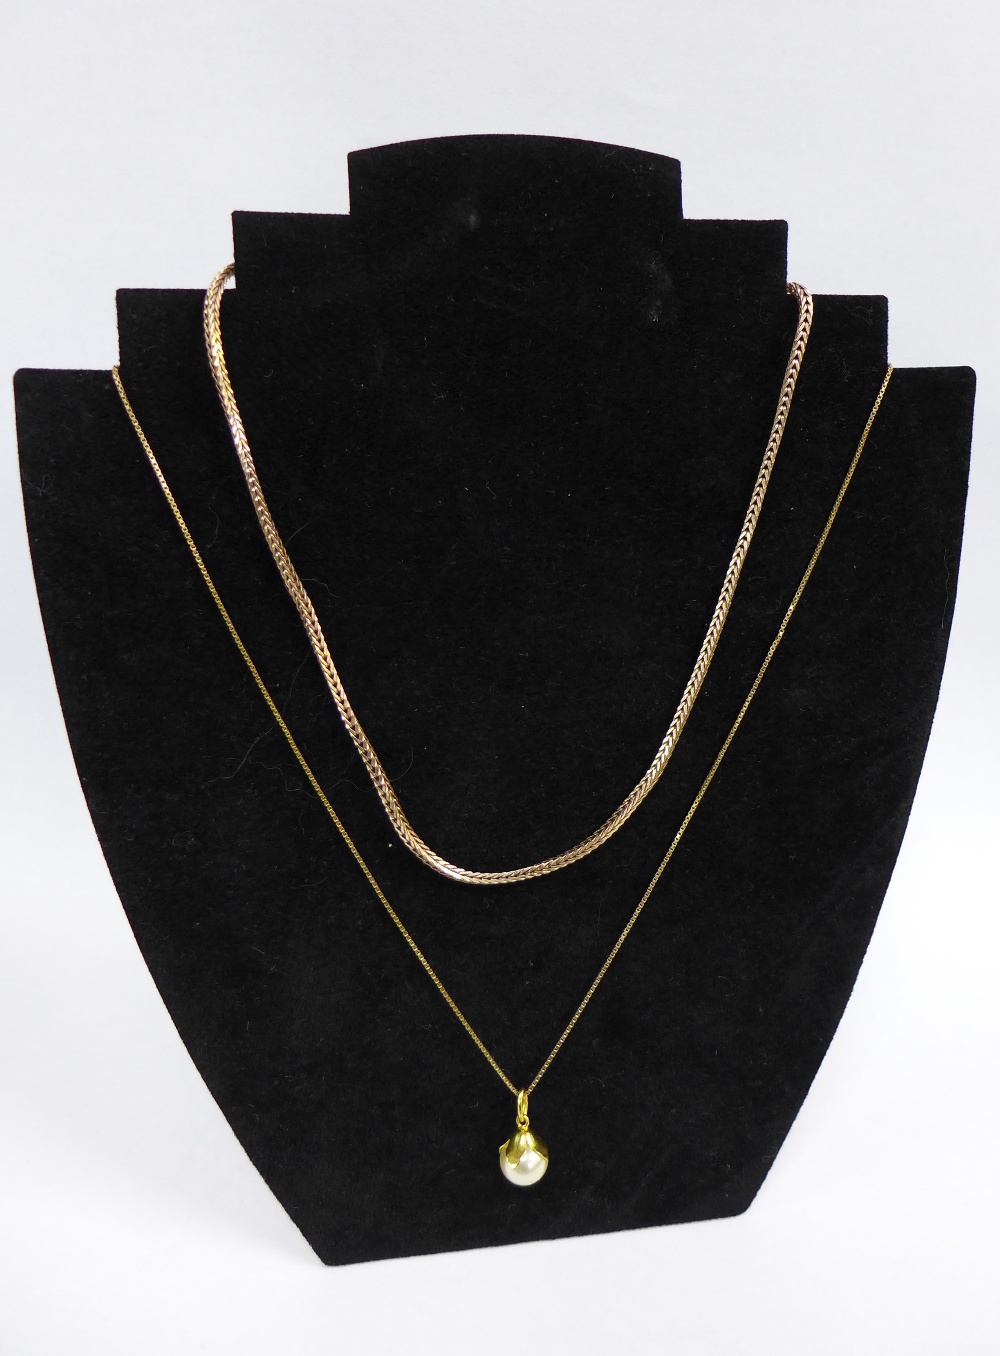 9ct gold foxtail link necklace together with a 9ct gold box link chain with a faux pearl pendant, (